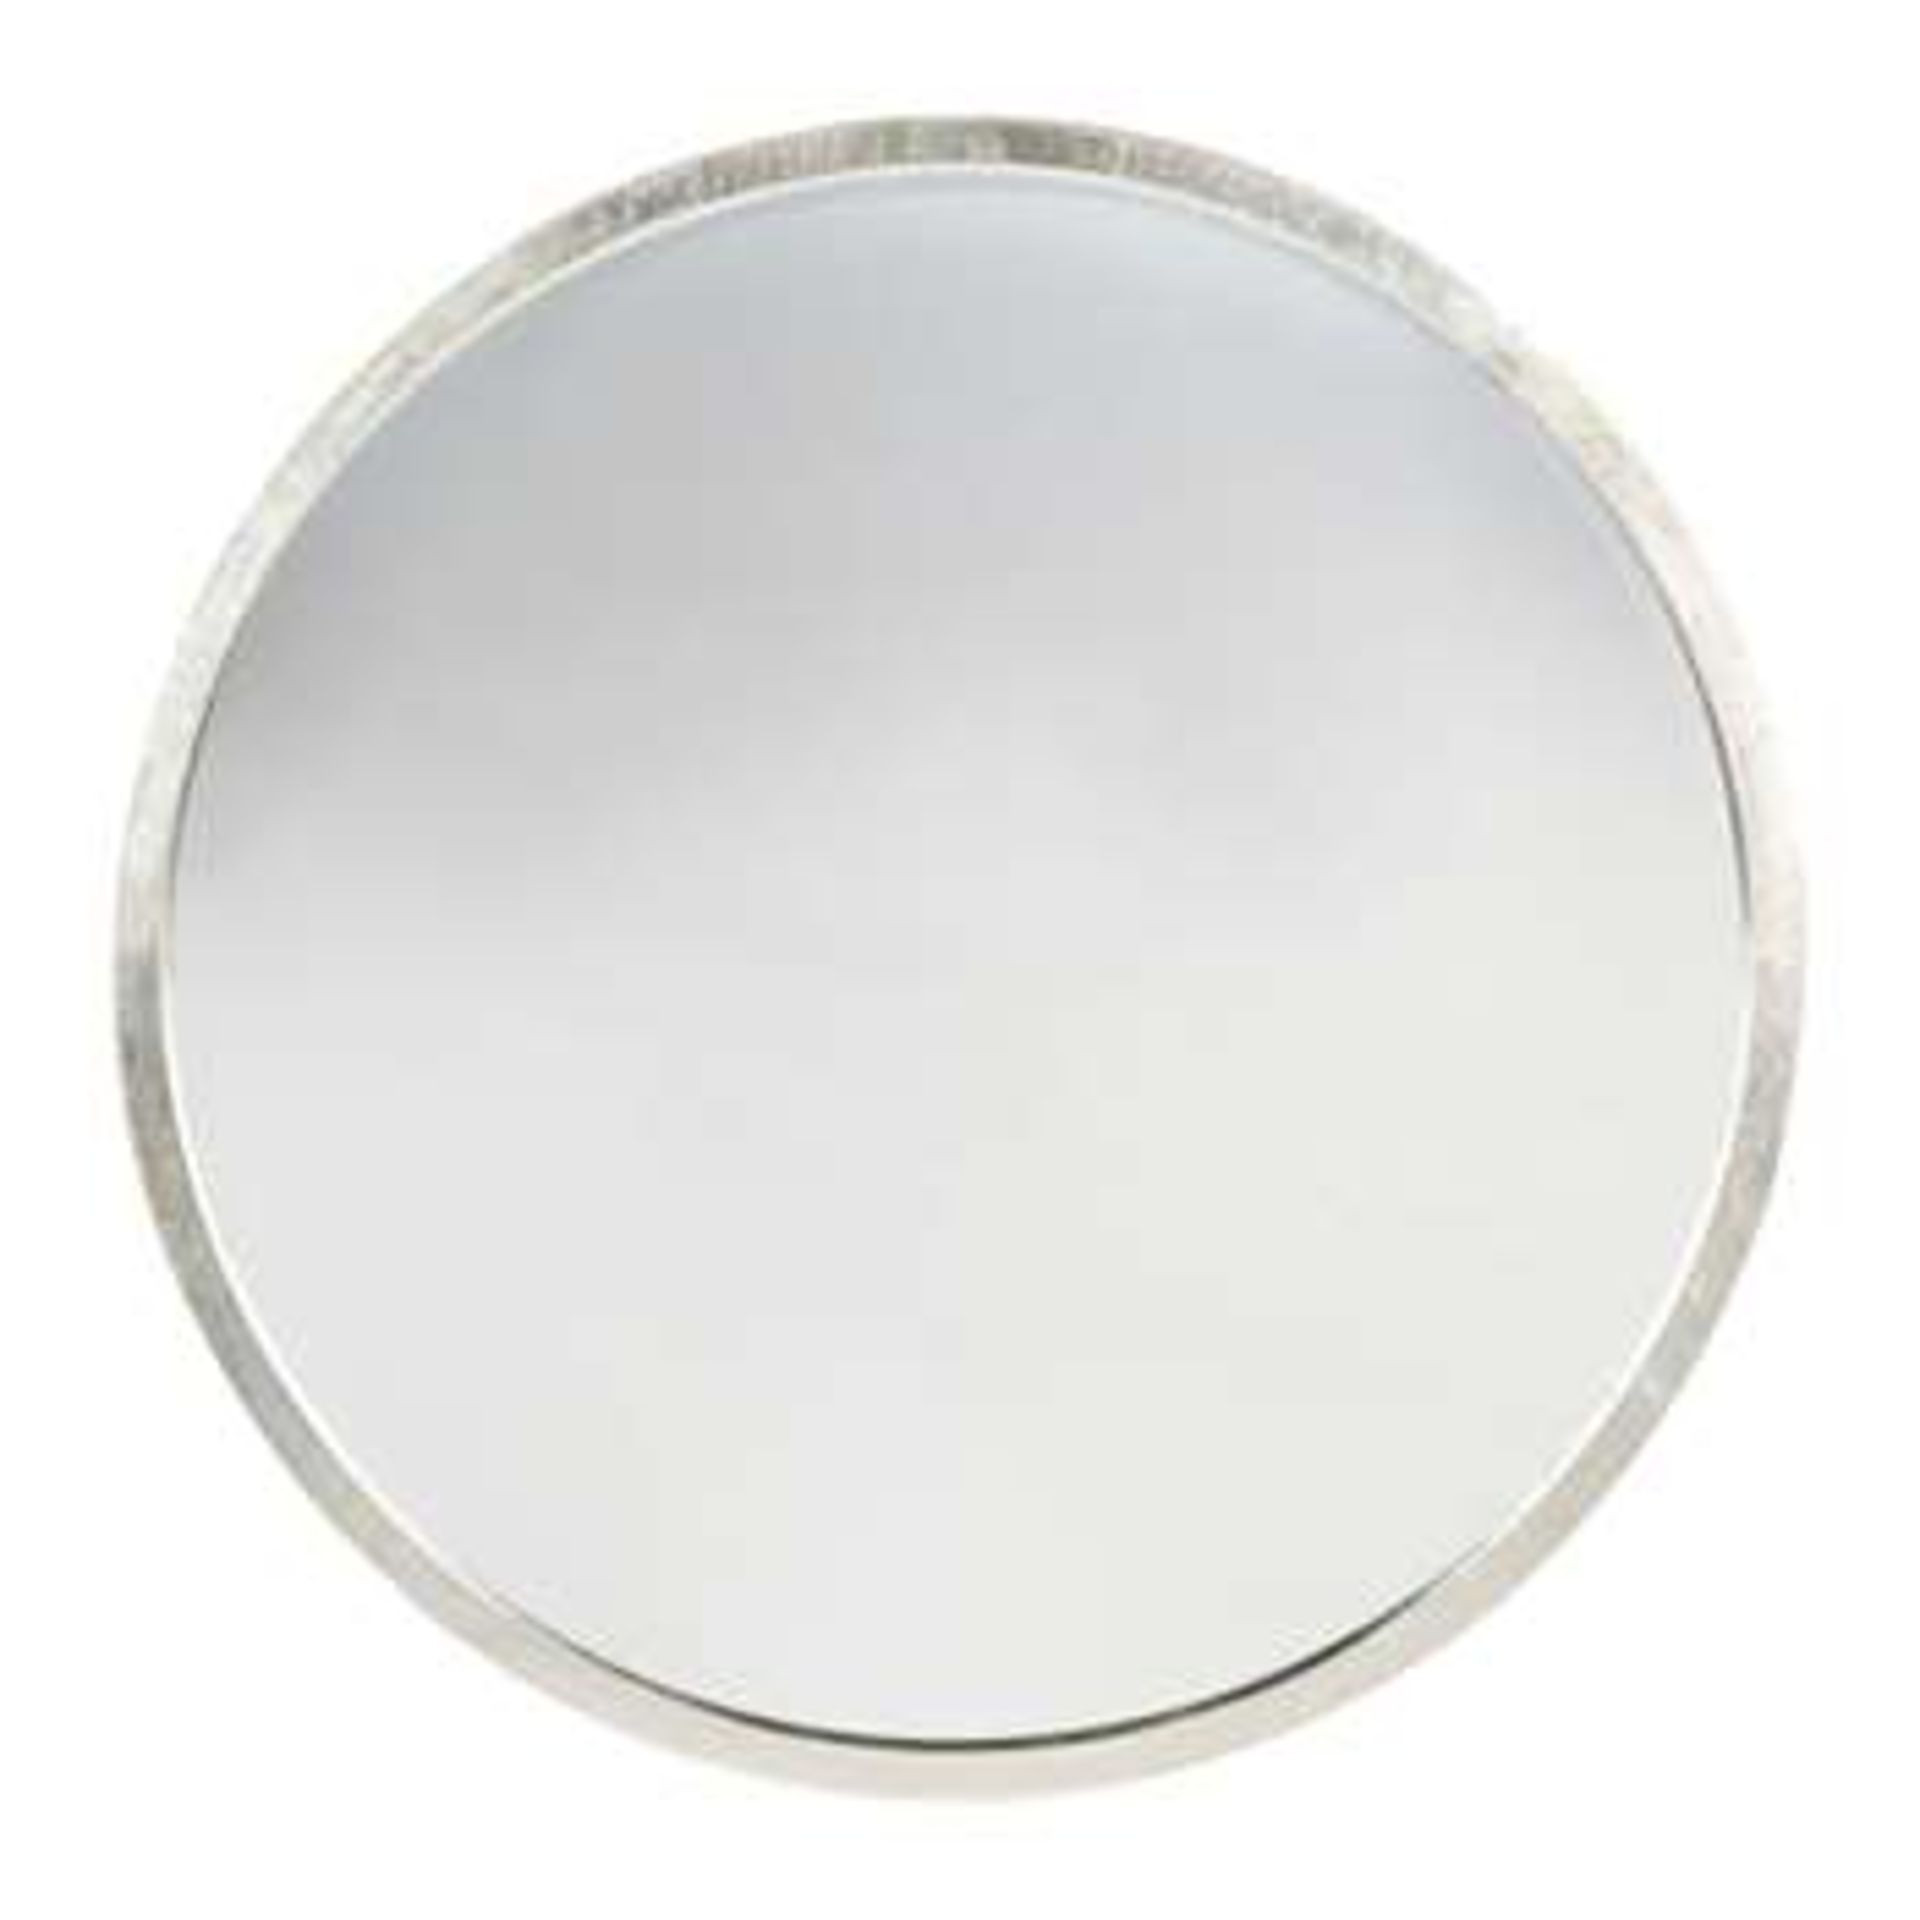 Laura Ashley Silver Constance Mirror Our Constance Small Round Mirror In Silver Has A Contemporary - Image 2 of 2